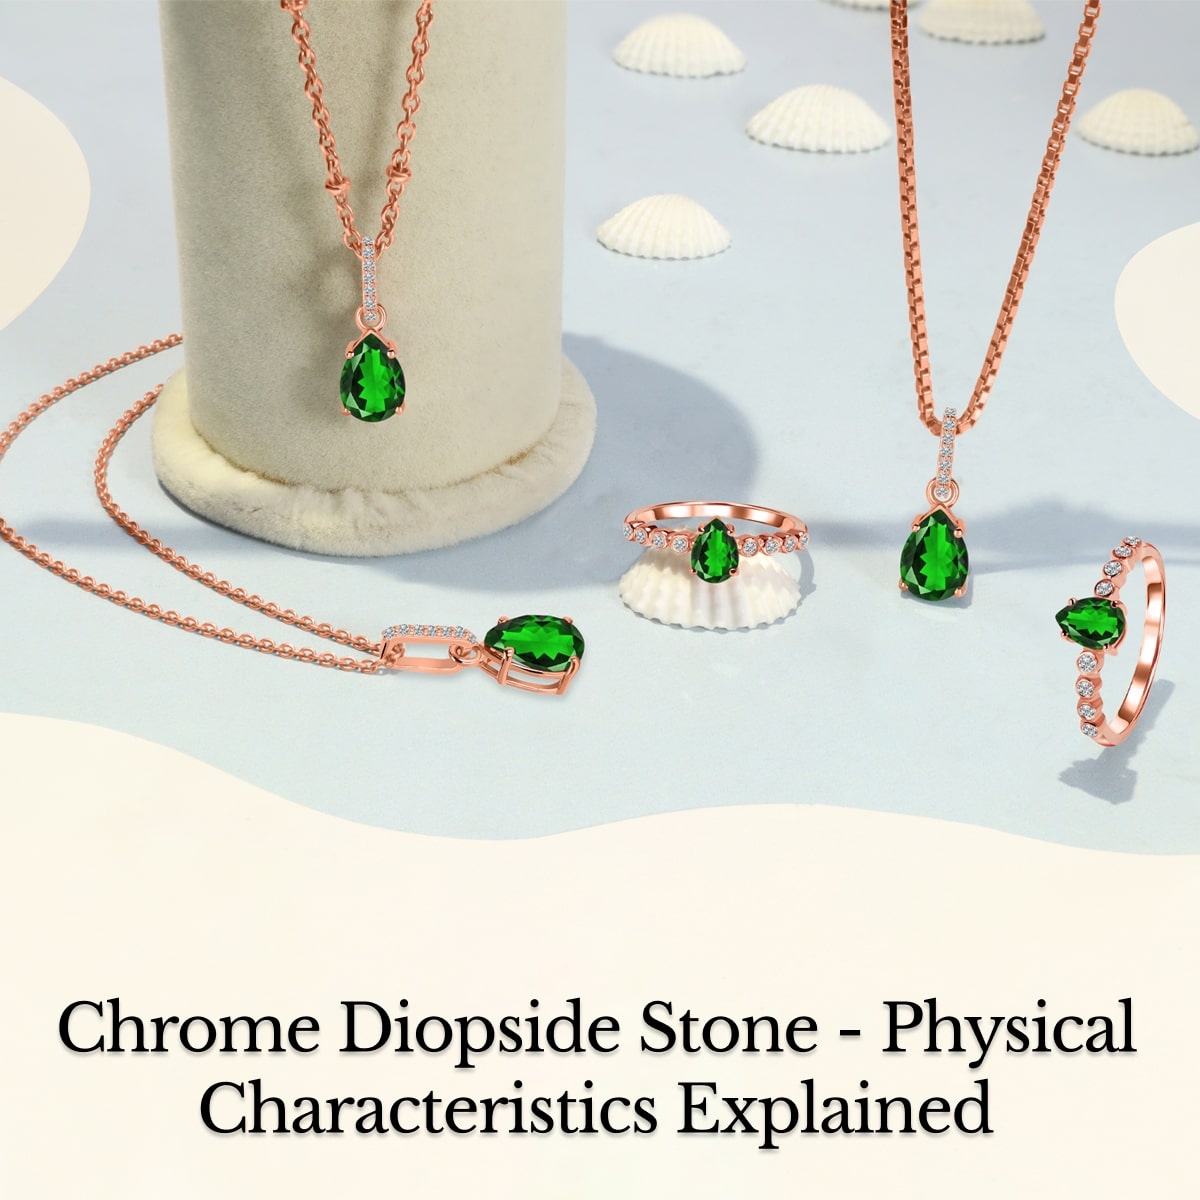 Physical Properties of Chrome Diopside Stone